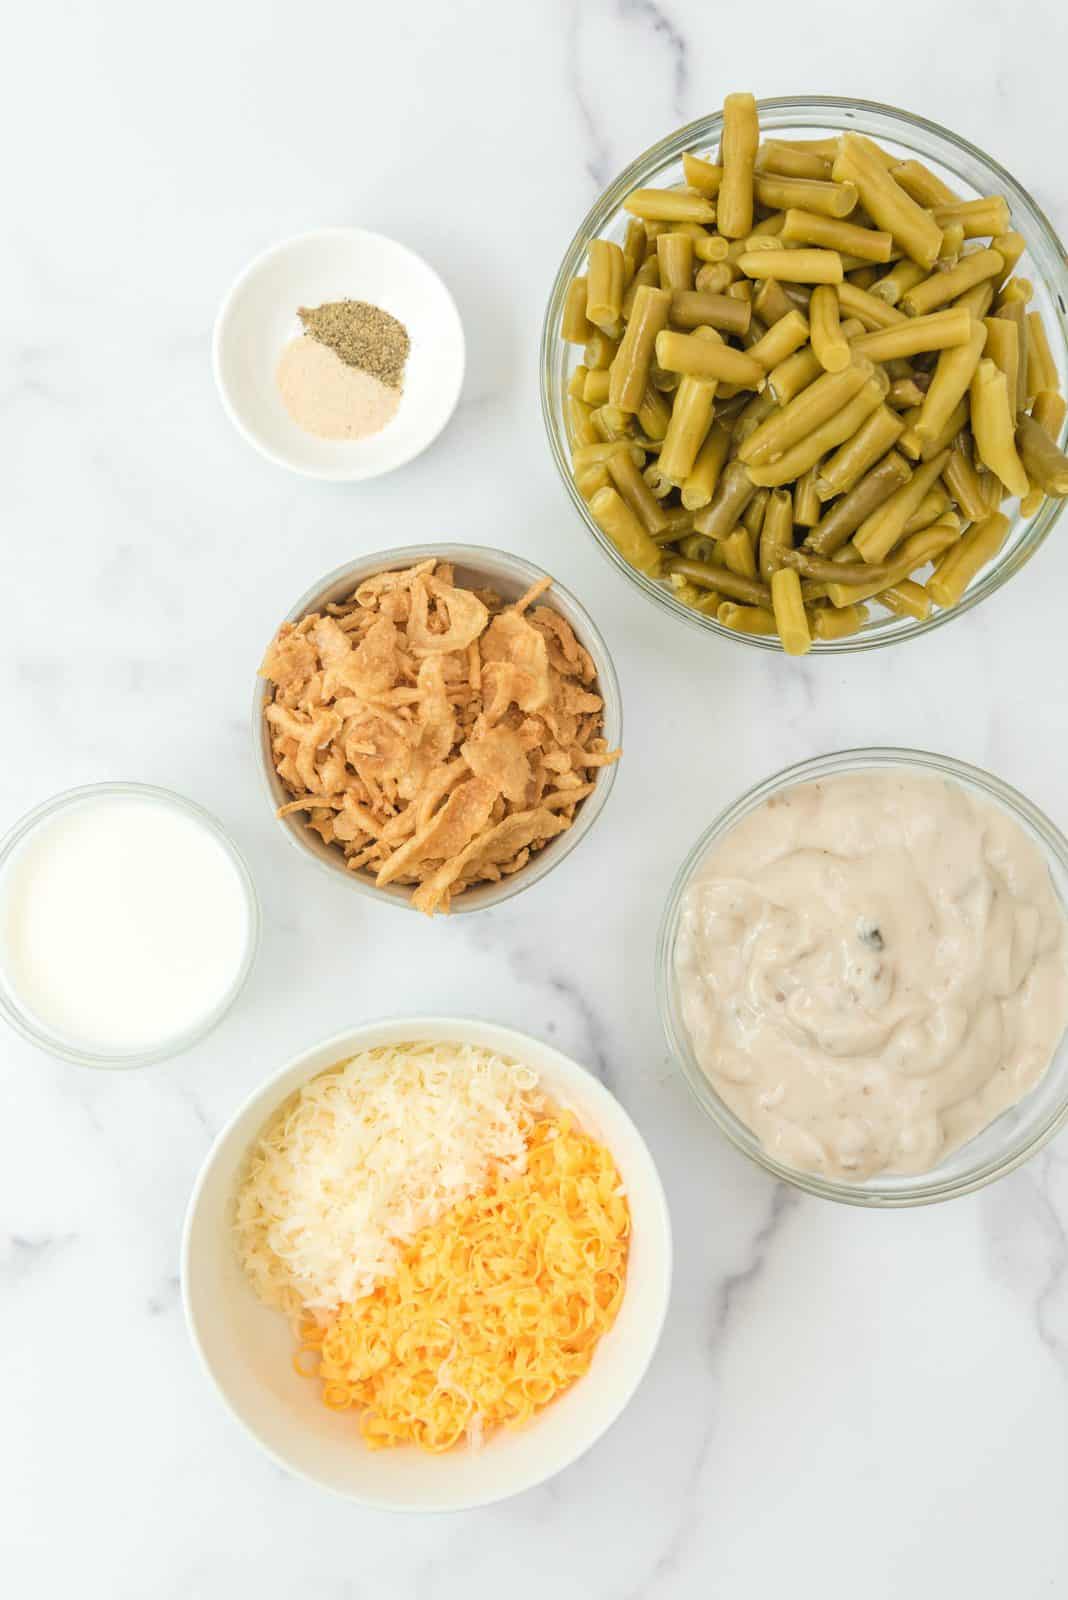 Ingredients needed: cream of mushroom soup, milk, onion powder, pepper, green beans, parmesan cheese, cheddar cheese and french fried onions.